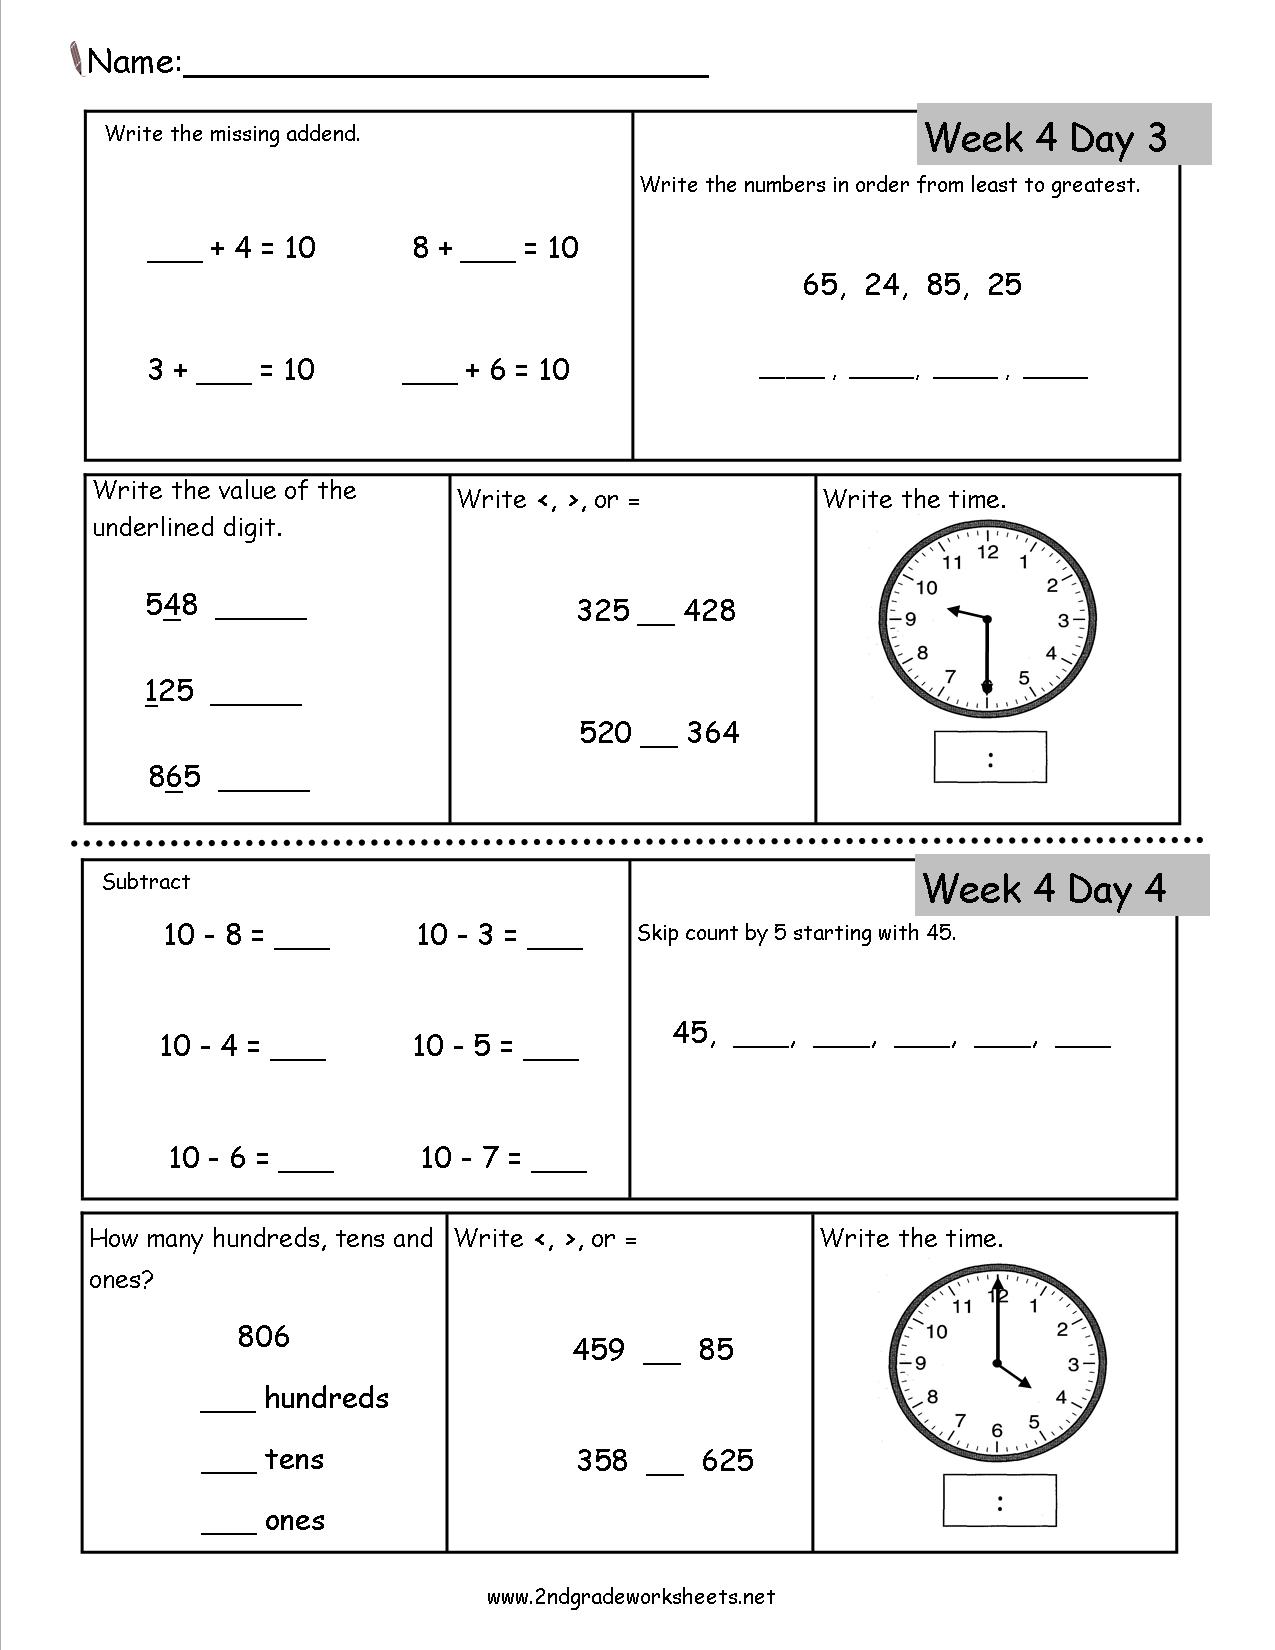 2nd grade math worksheets best coloring pages for kids free 2nd grade